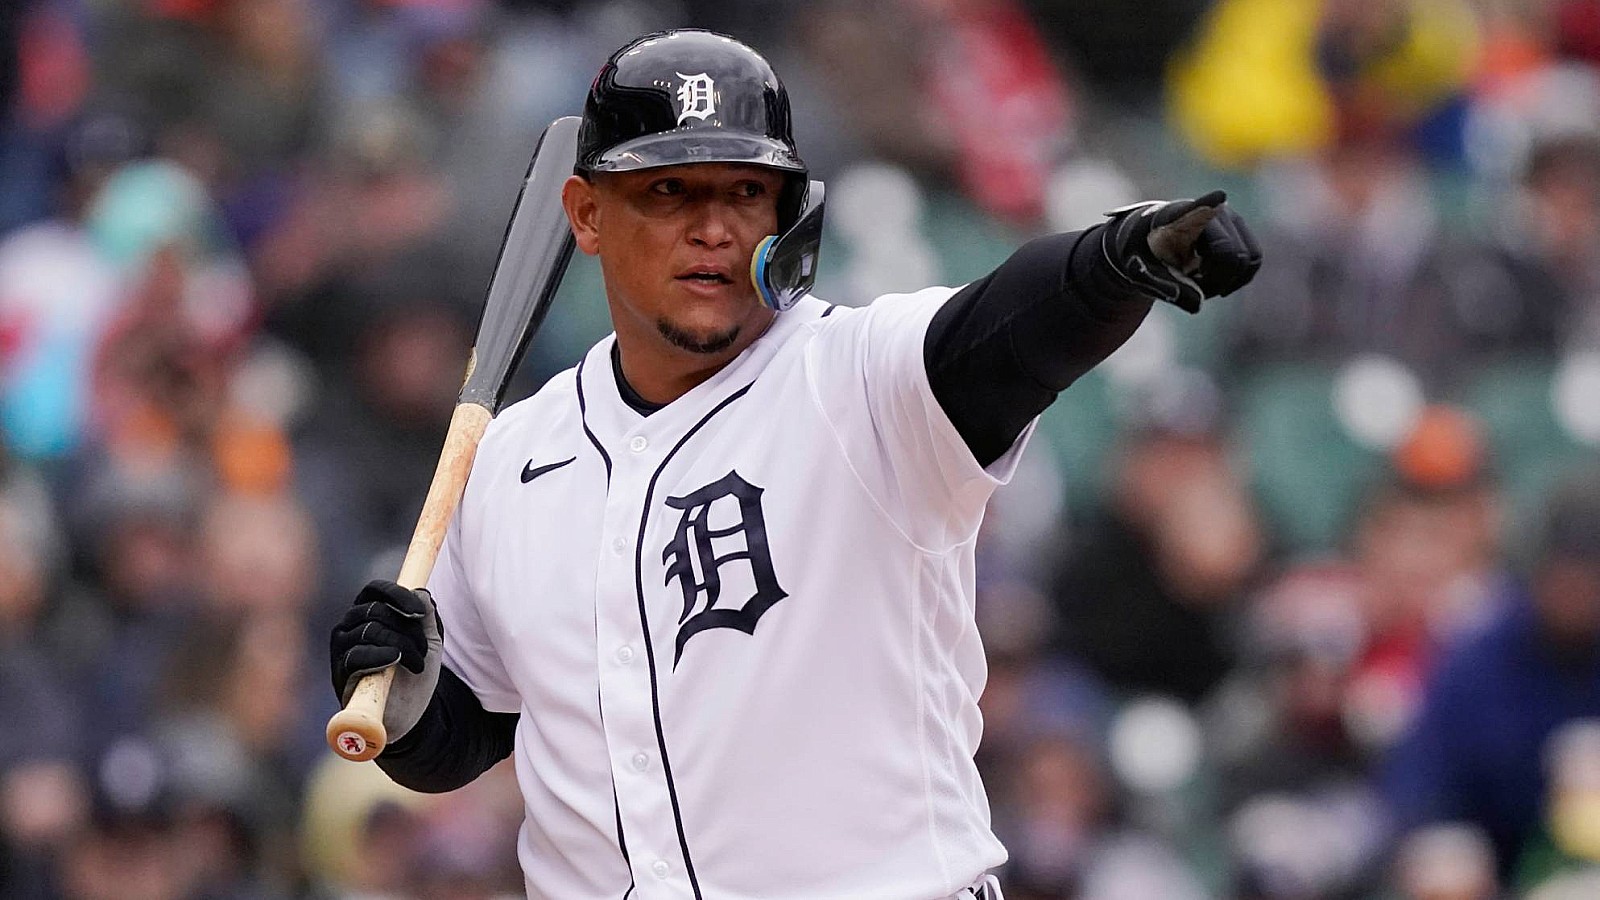 Miguel Cabrera is already thinking about his retirement and has a possible date